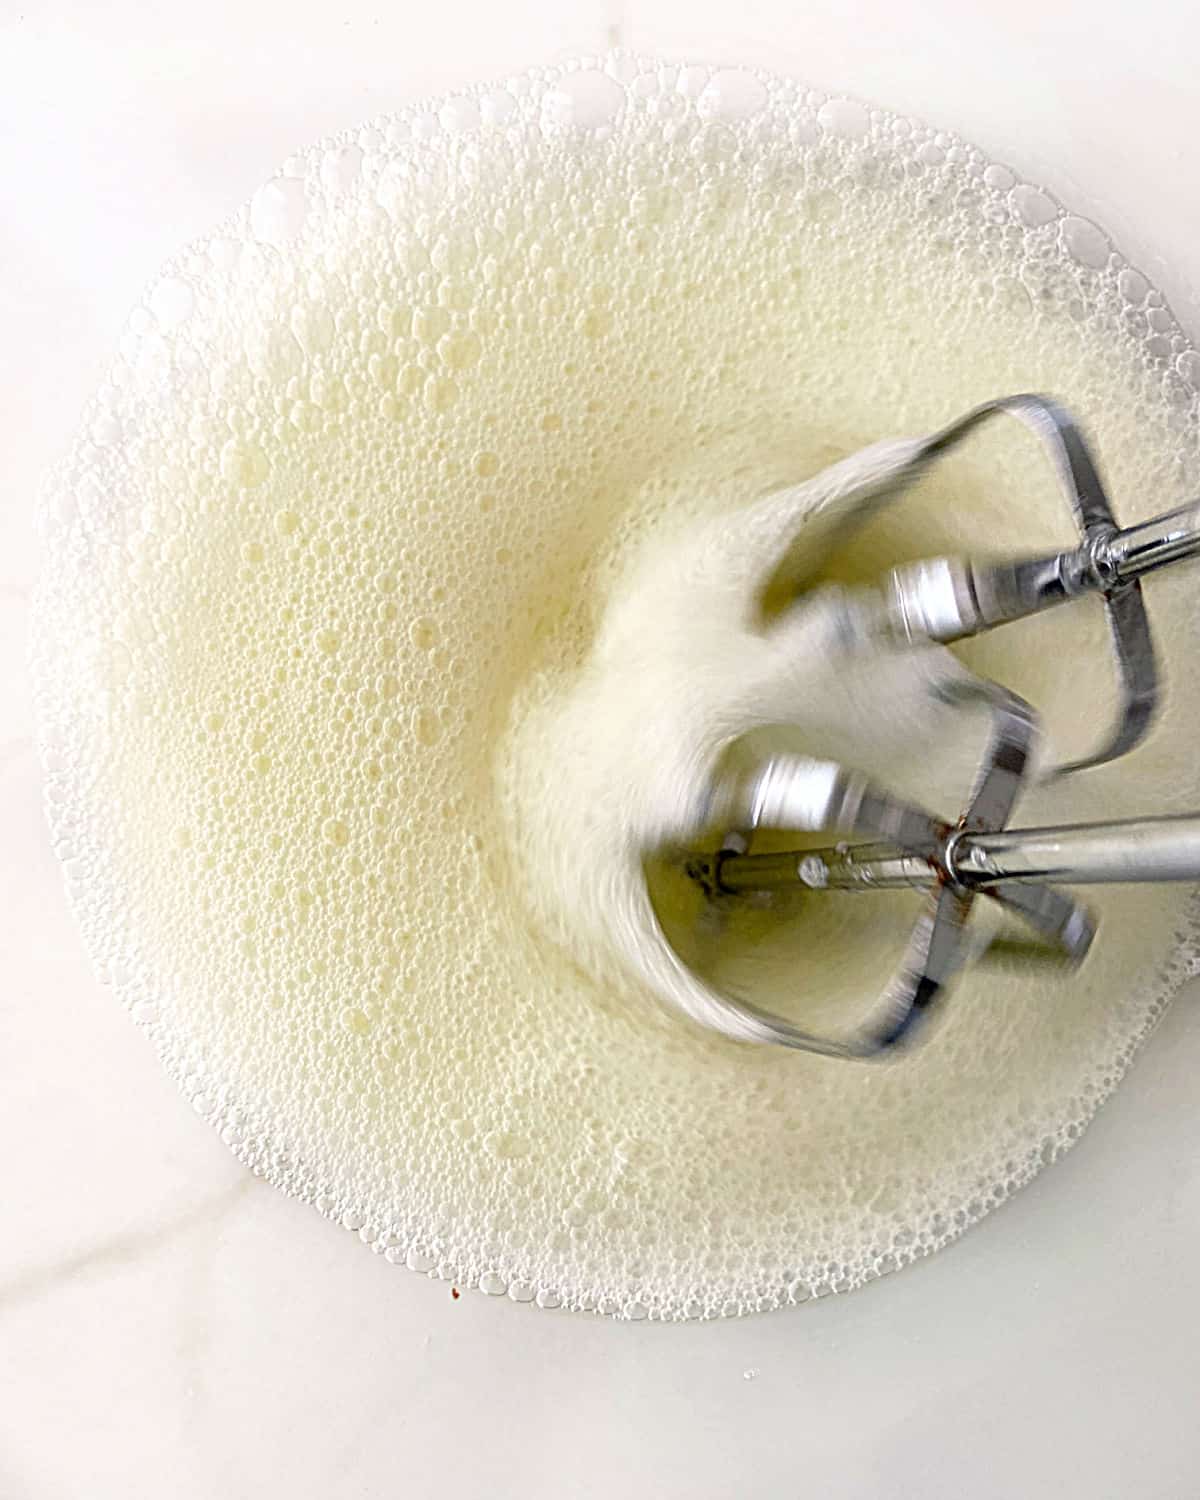 Frothy egg white mixture being beaten in a glass bowl on a white marble surface.